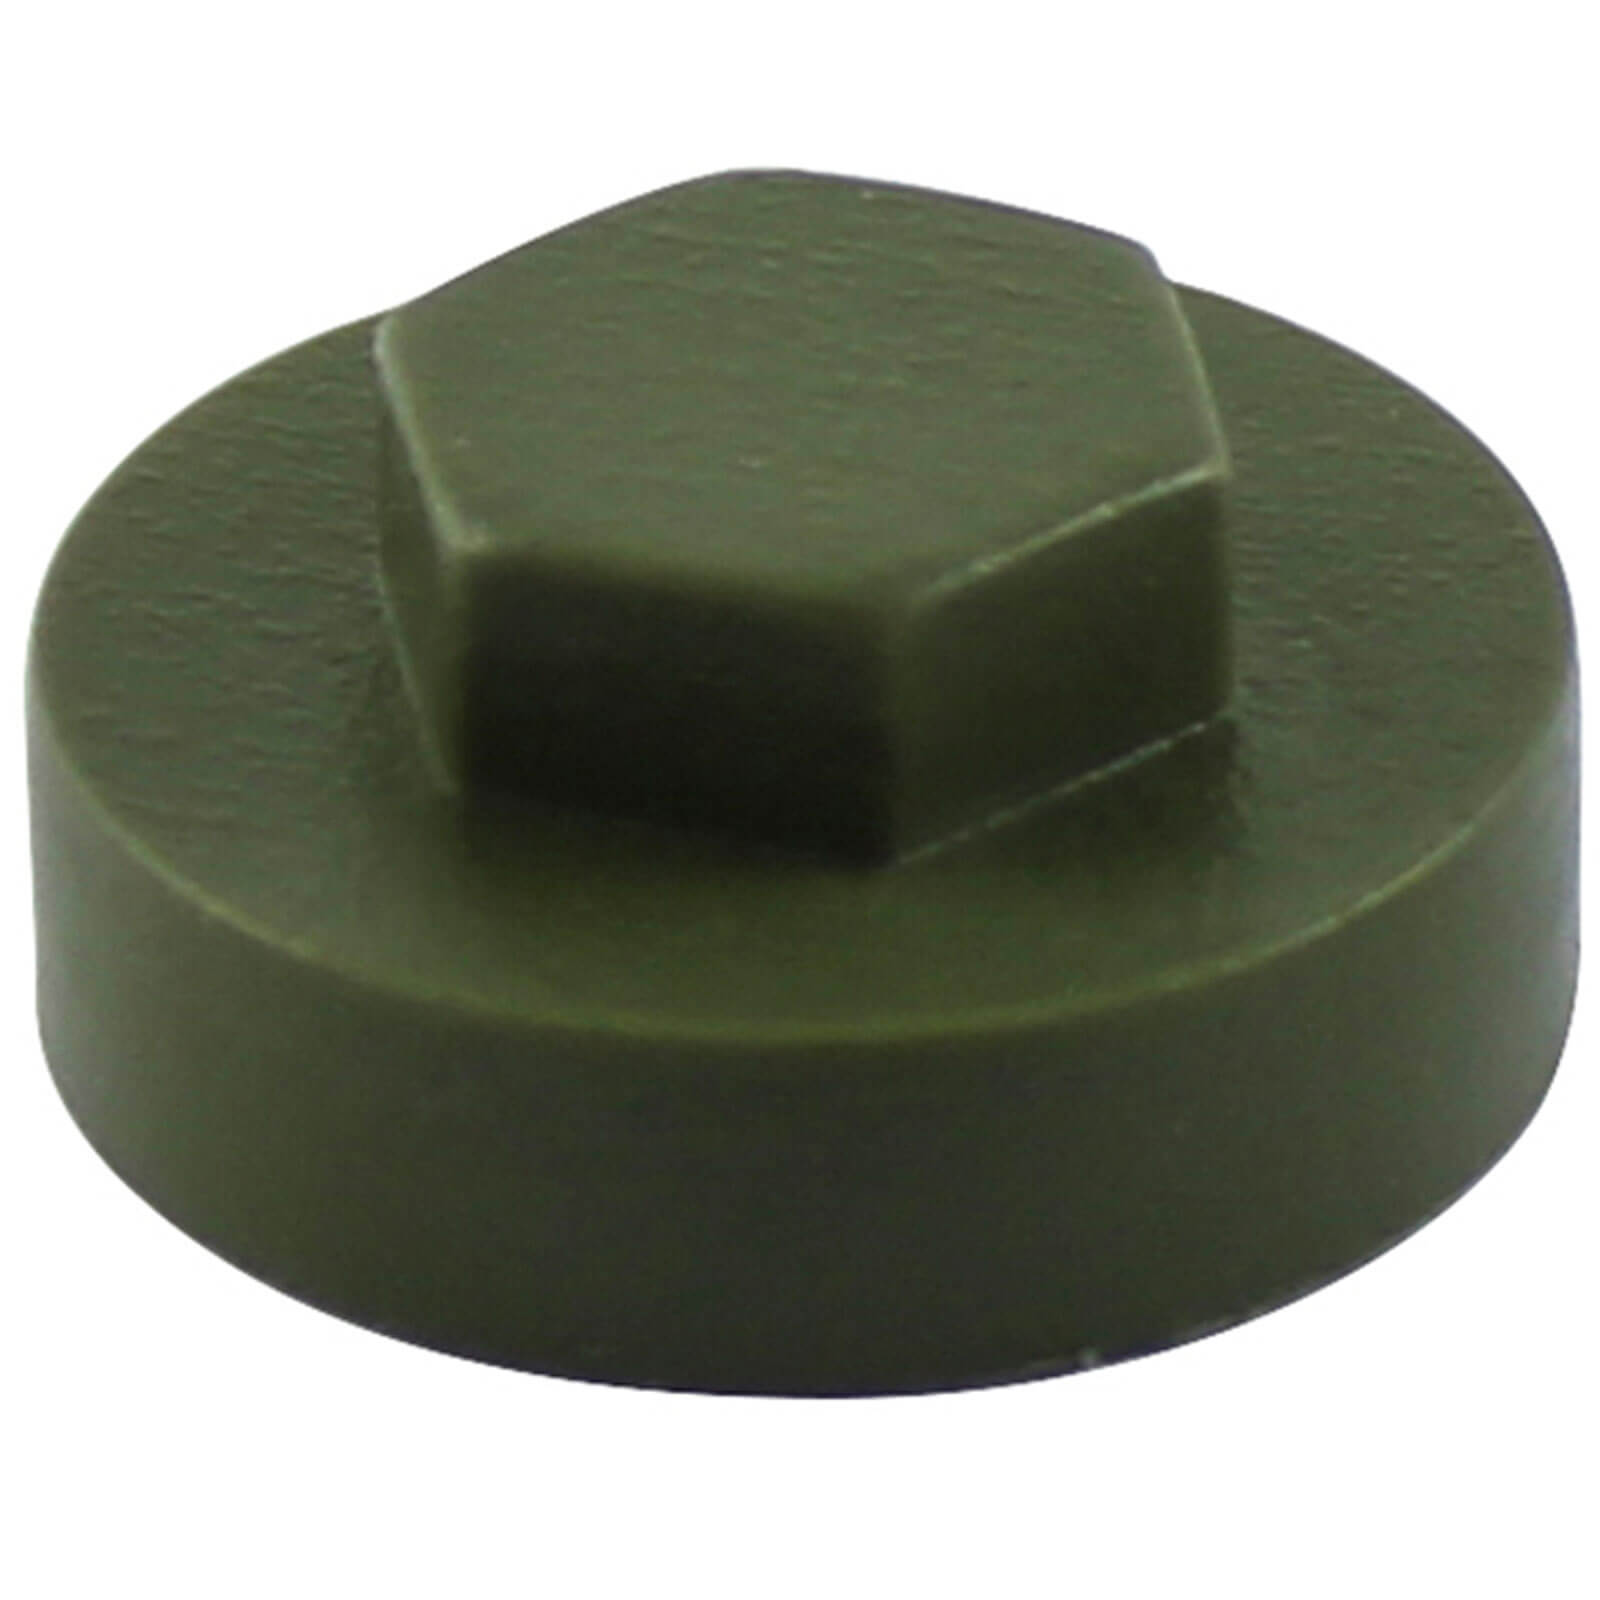 Image of Colour Match Hexagon Screw Cover Cap 5/16" x 19mm Olive Green Pack of 1000